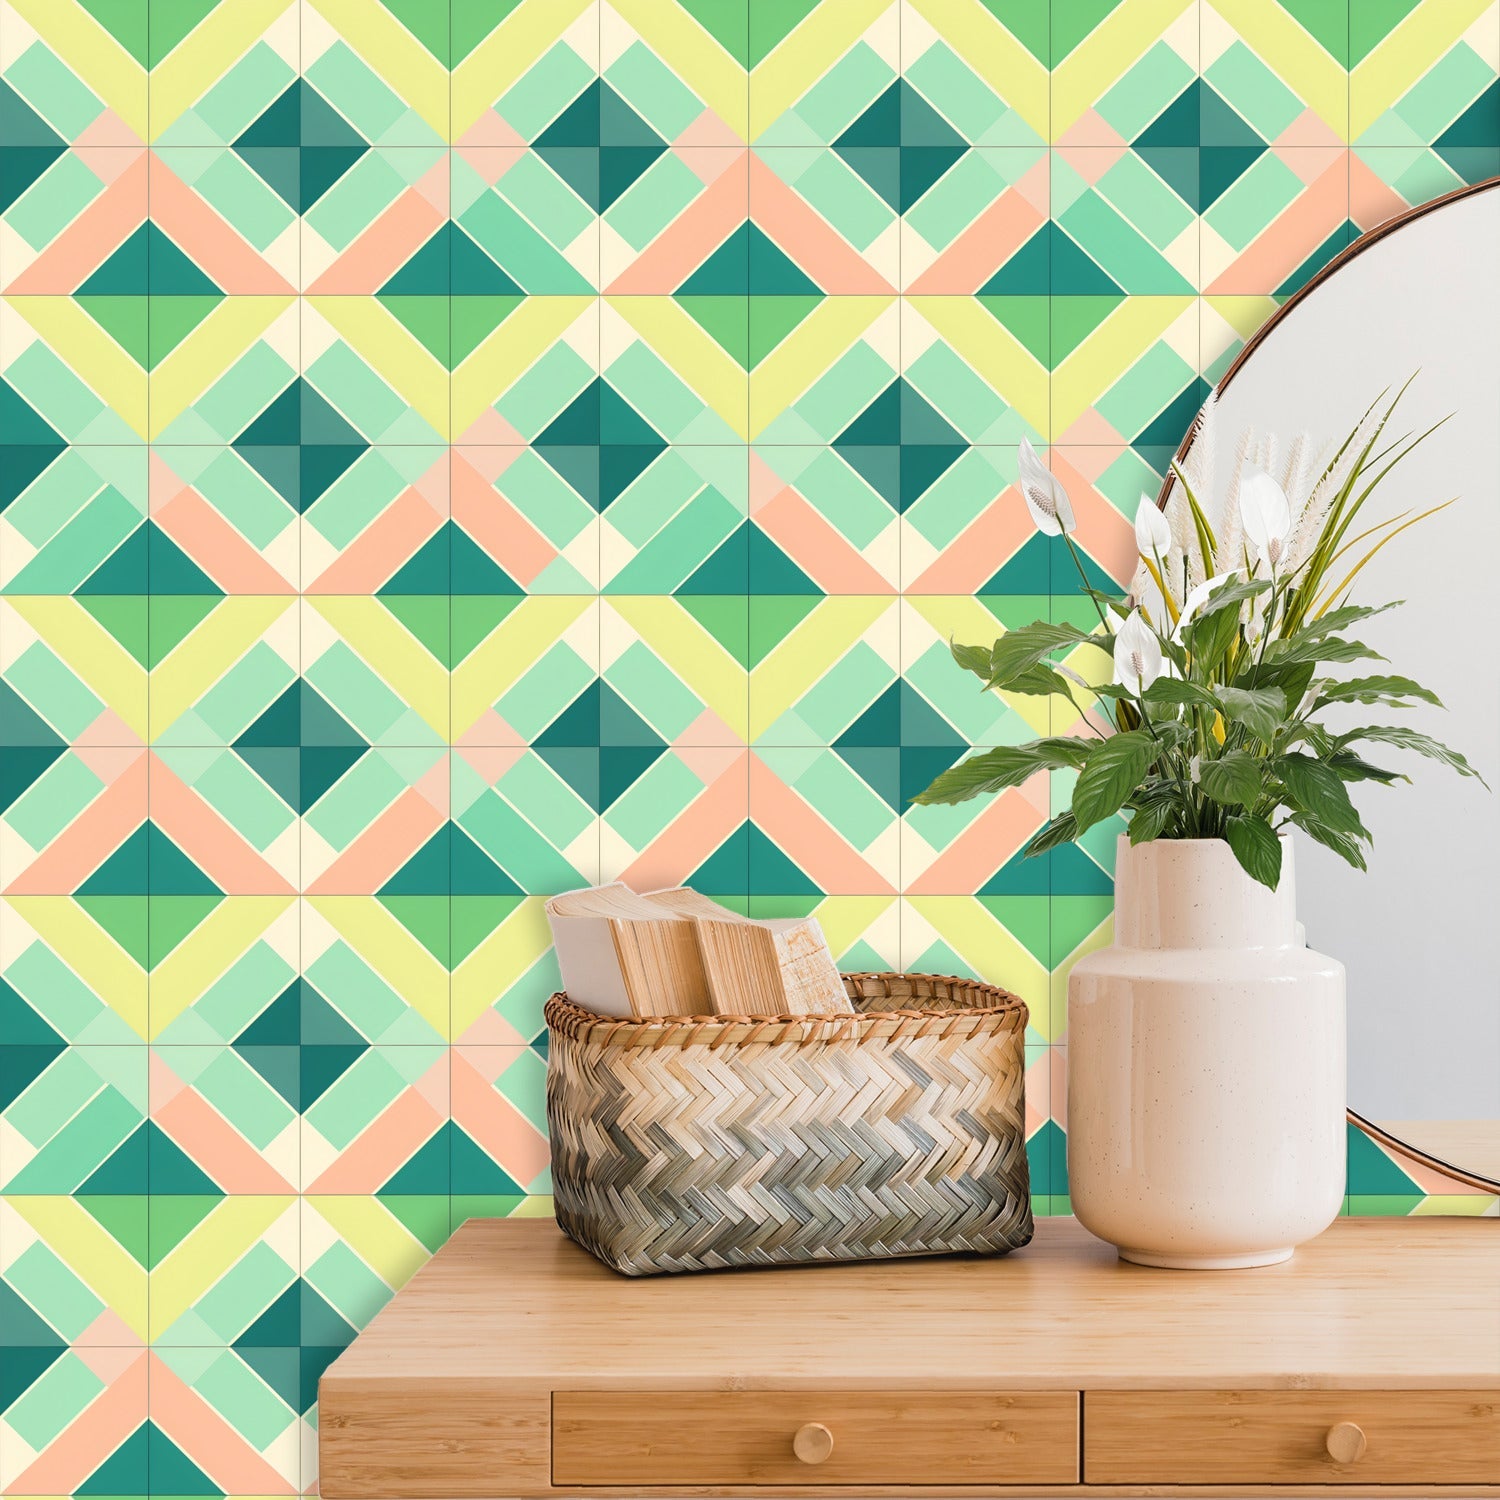 A Geometric Vintage Greens - Peel And Stick Wallpaper Panels poster can transform your living room space with AI generated art.